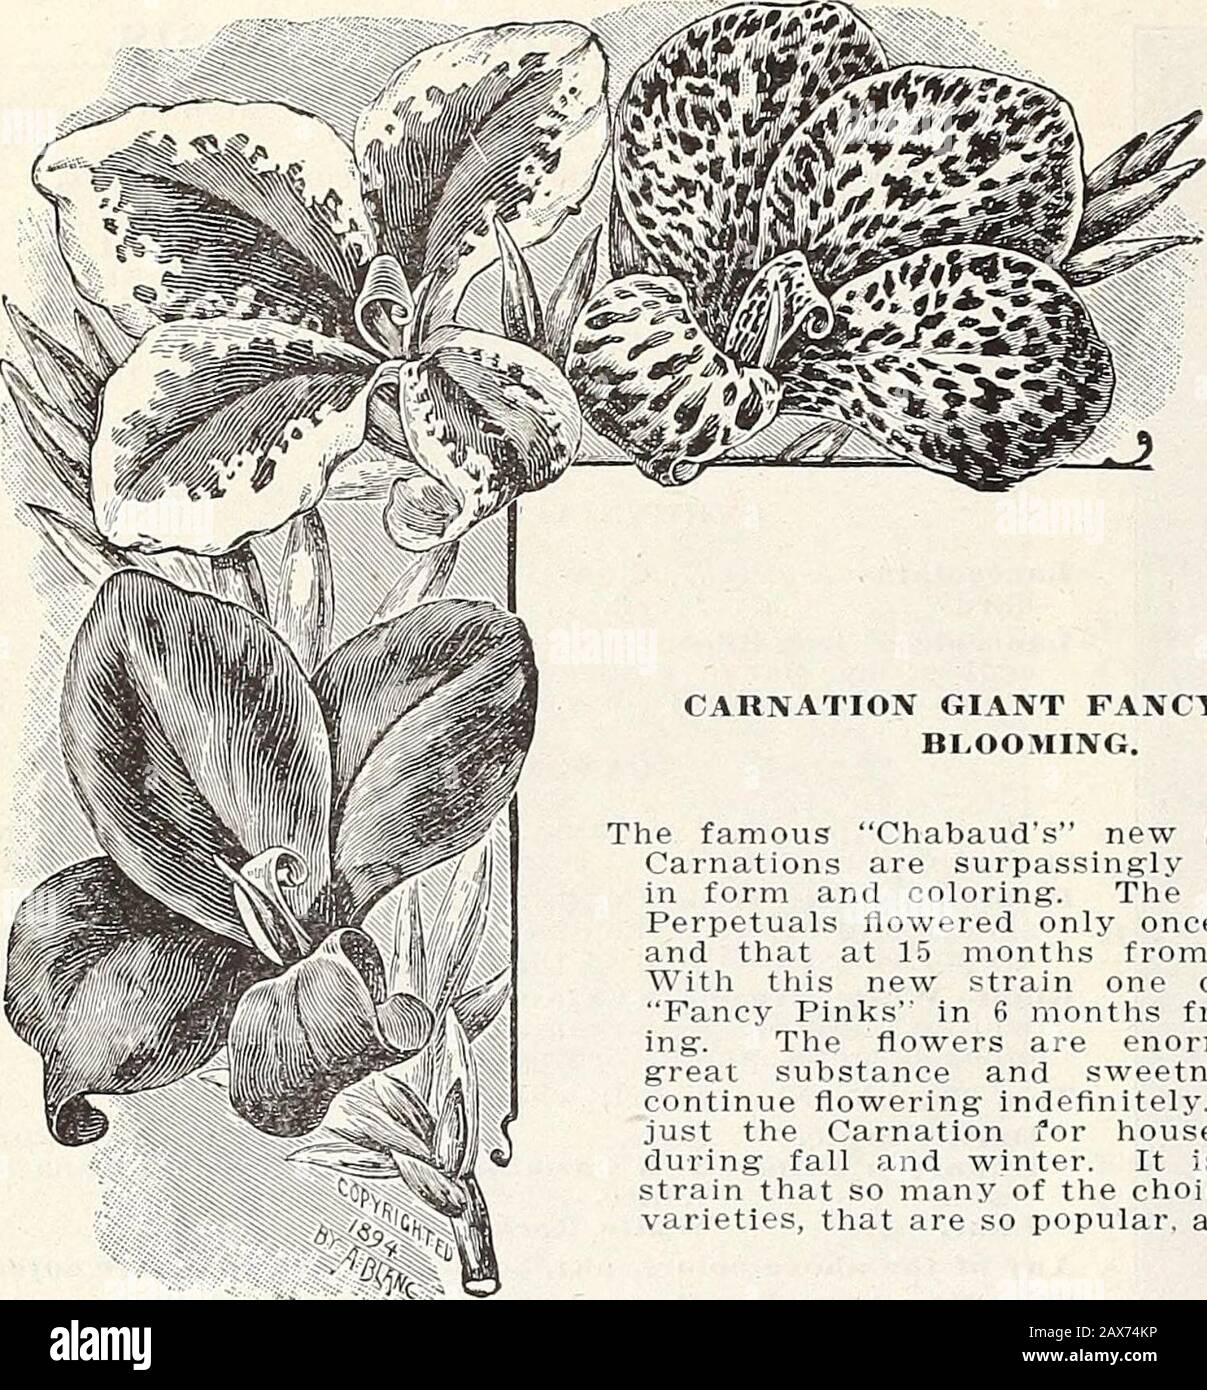 Currie's farm and garden annual : spring 1915 . CANTERBURY BELLS. G6 CURRIE BROTHERS COMPANY, MILWAUKEE, WIS.. CARNATION GIANT FANCY EVER BLOOMING. The famous Chabauds new strain ofCarnations are surpassingly beautifulin form and coloring. The old stylePerpetuals flowered only once a year,and that at 15 months from sowing.With this new strain one can haveFancy Pinks in 6 months from sow-ing. The flowers are enormous, ofgreat substance and sweetness, andcontinue flowering indefinitely. This isjust the Carnation for house cultureduring fall and winter. It is in thisstrain that so many of the cho Stock Photo